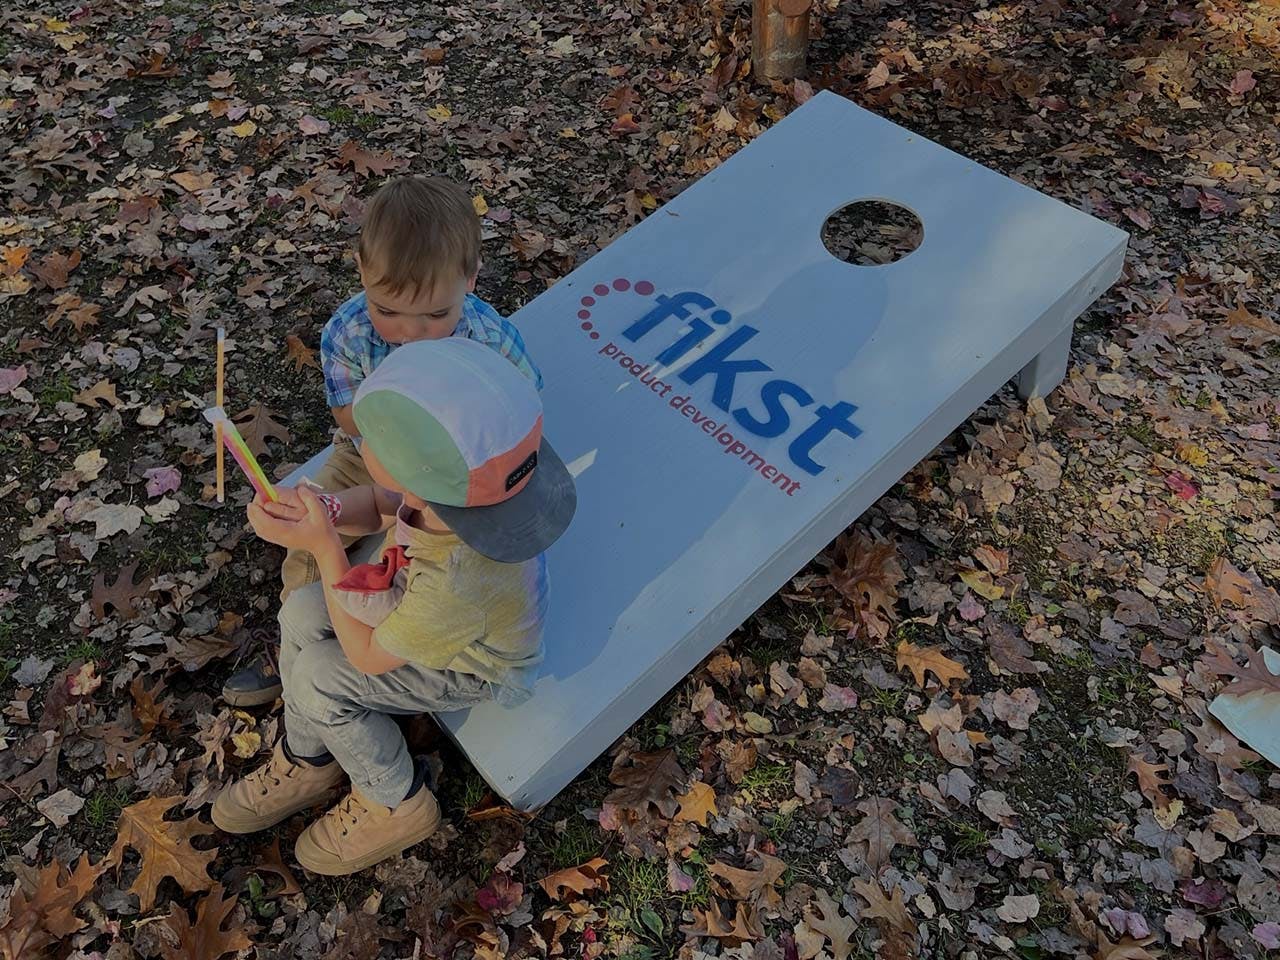 Two children sitting and playing on the edge of a Fikst corn hole game board